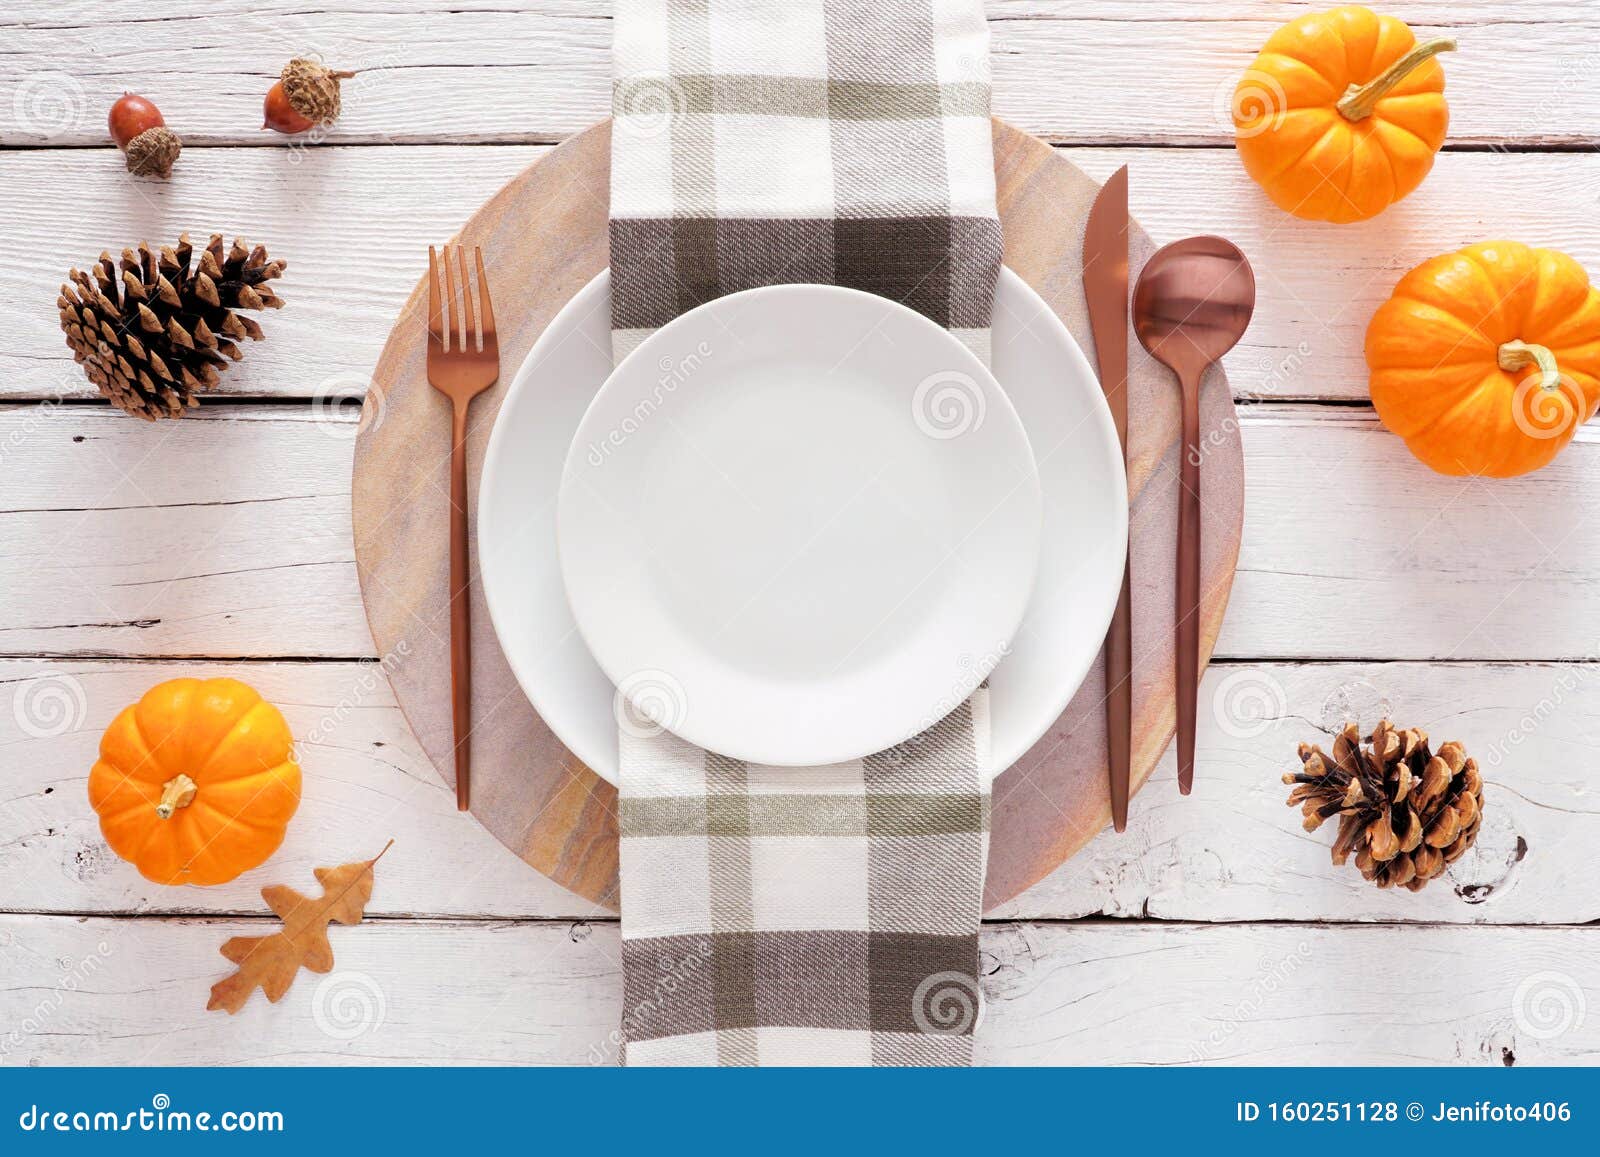 Fall Harvest or Thanksgiving Dinner Table Setting, Above View on White ...